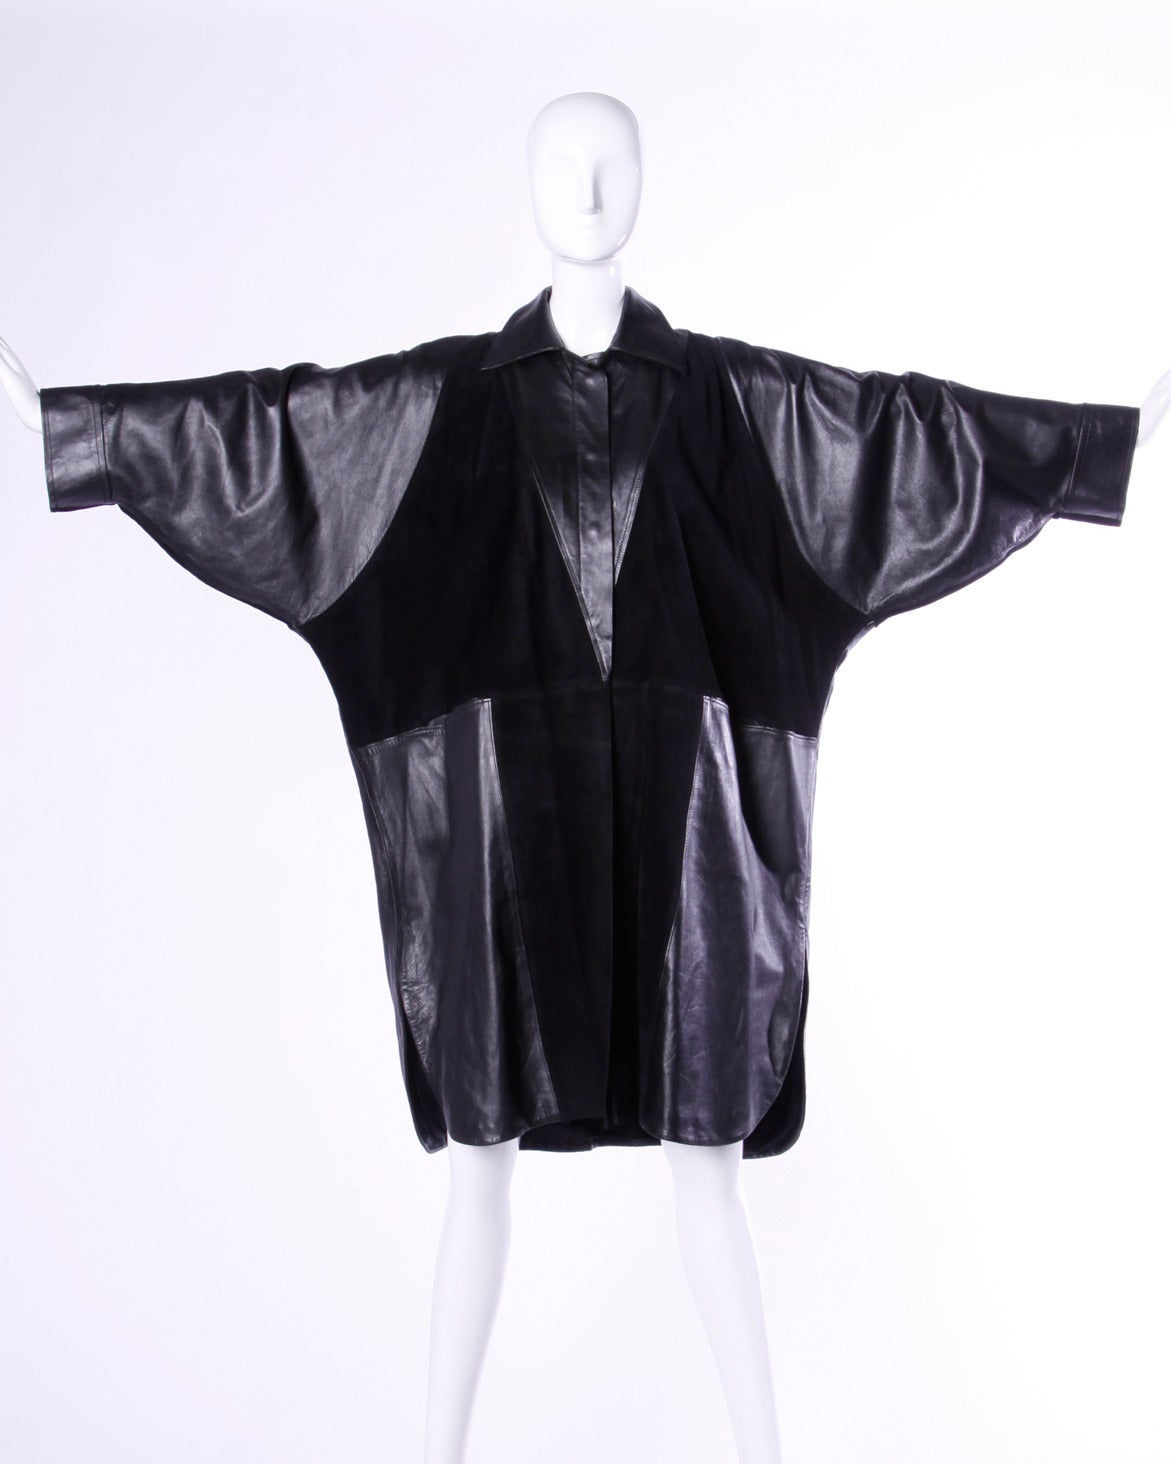 Stunning avant garde batwing coat by Jean Claude Jitrois featuring sued and leather fabric blocking, huge dolman sleeves and an elegant and unique silhouette. Soft buttery leather and unparalleled quality, this coat is just beautiful in